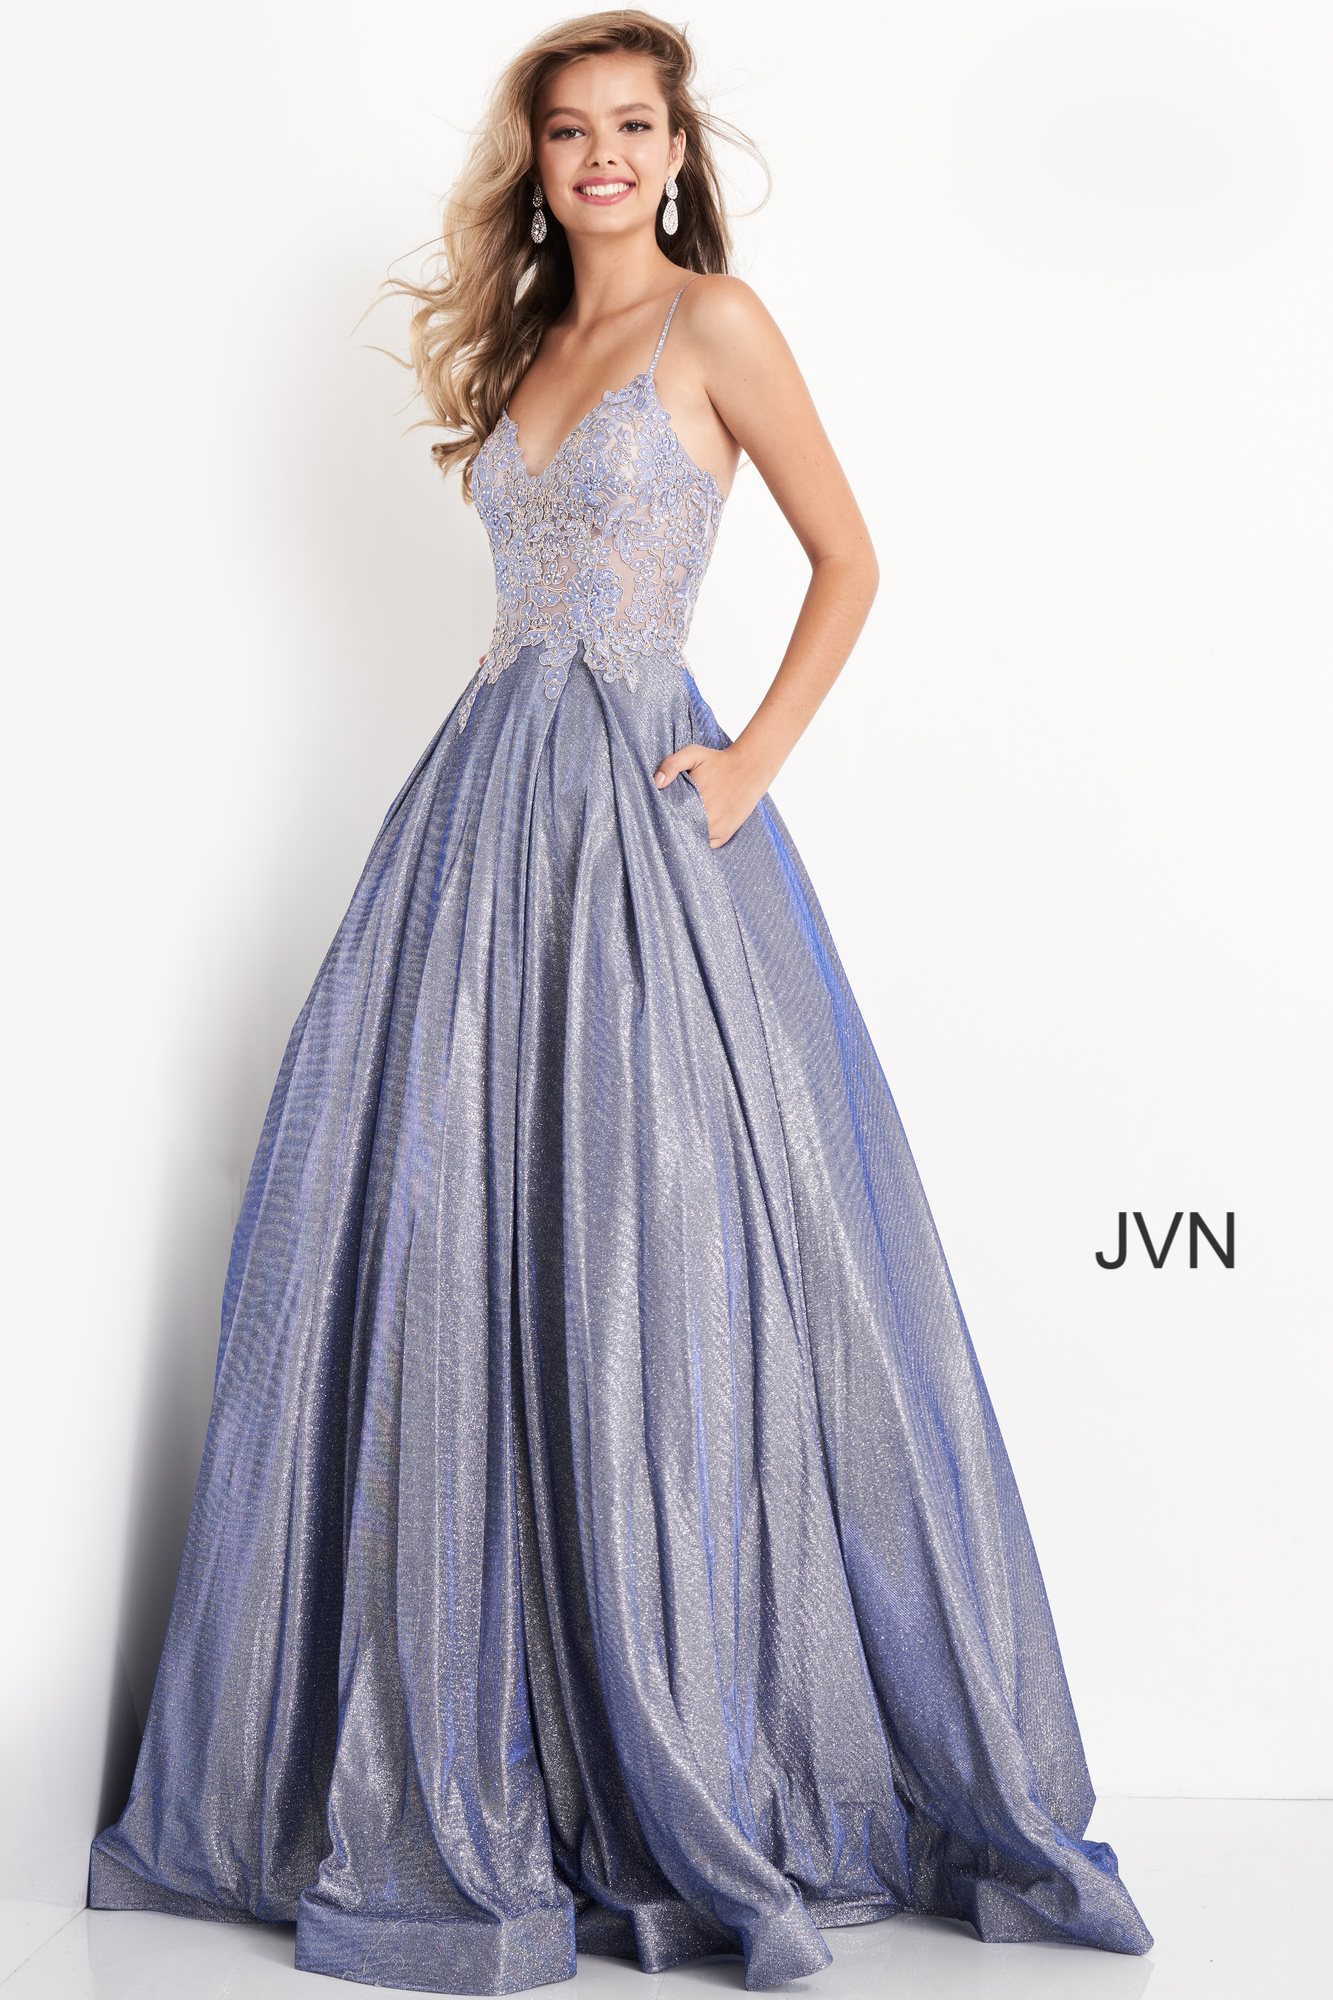 Jvn2206 Dress Nude Embroidered Floral Bodice Prom Ballgown 